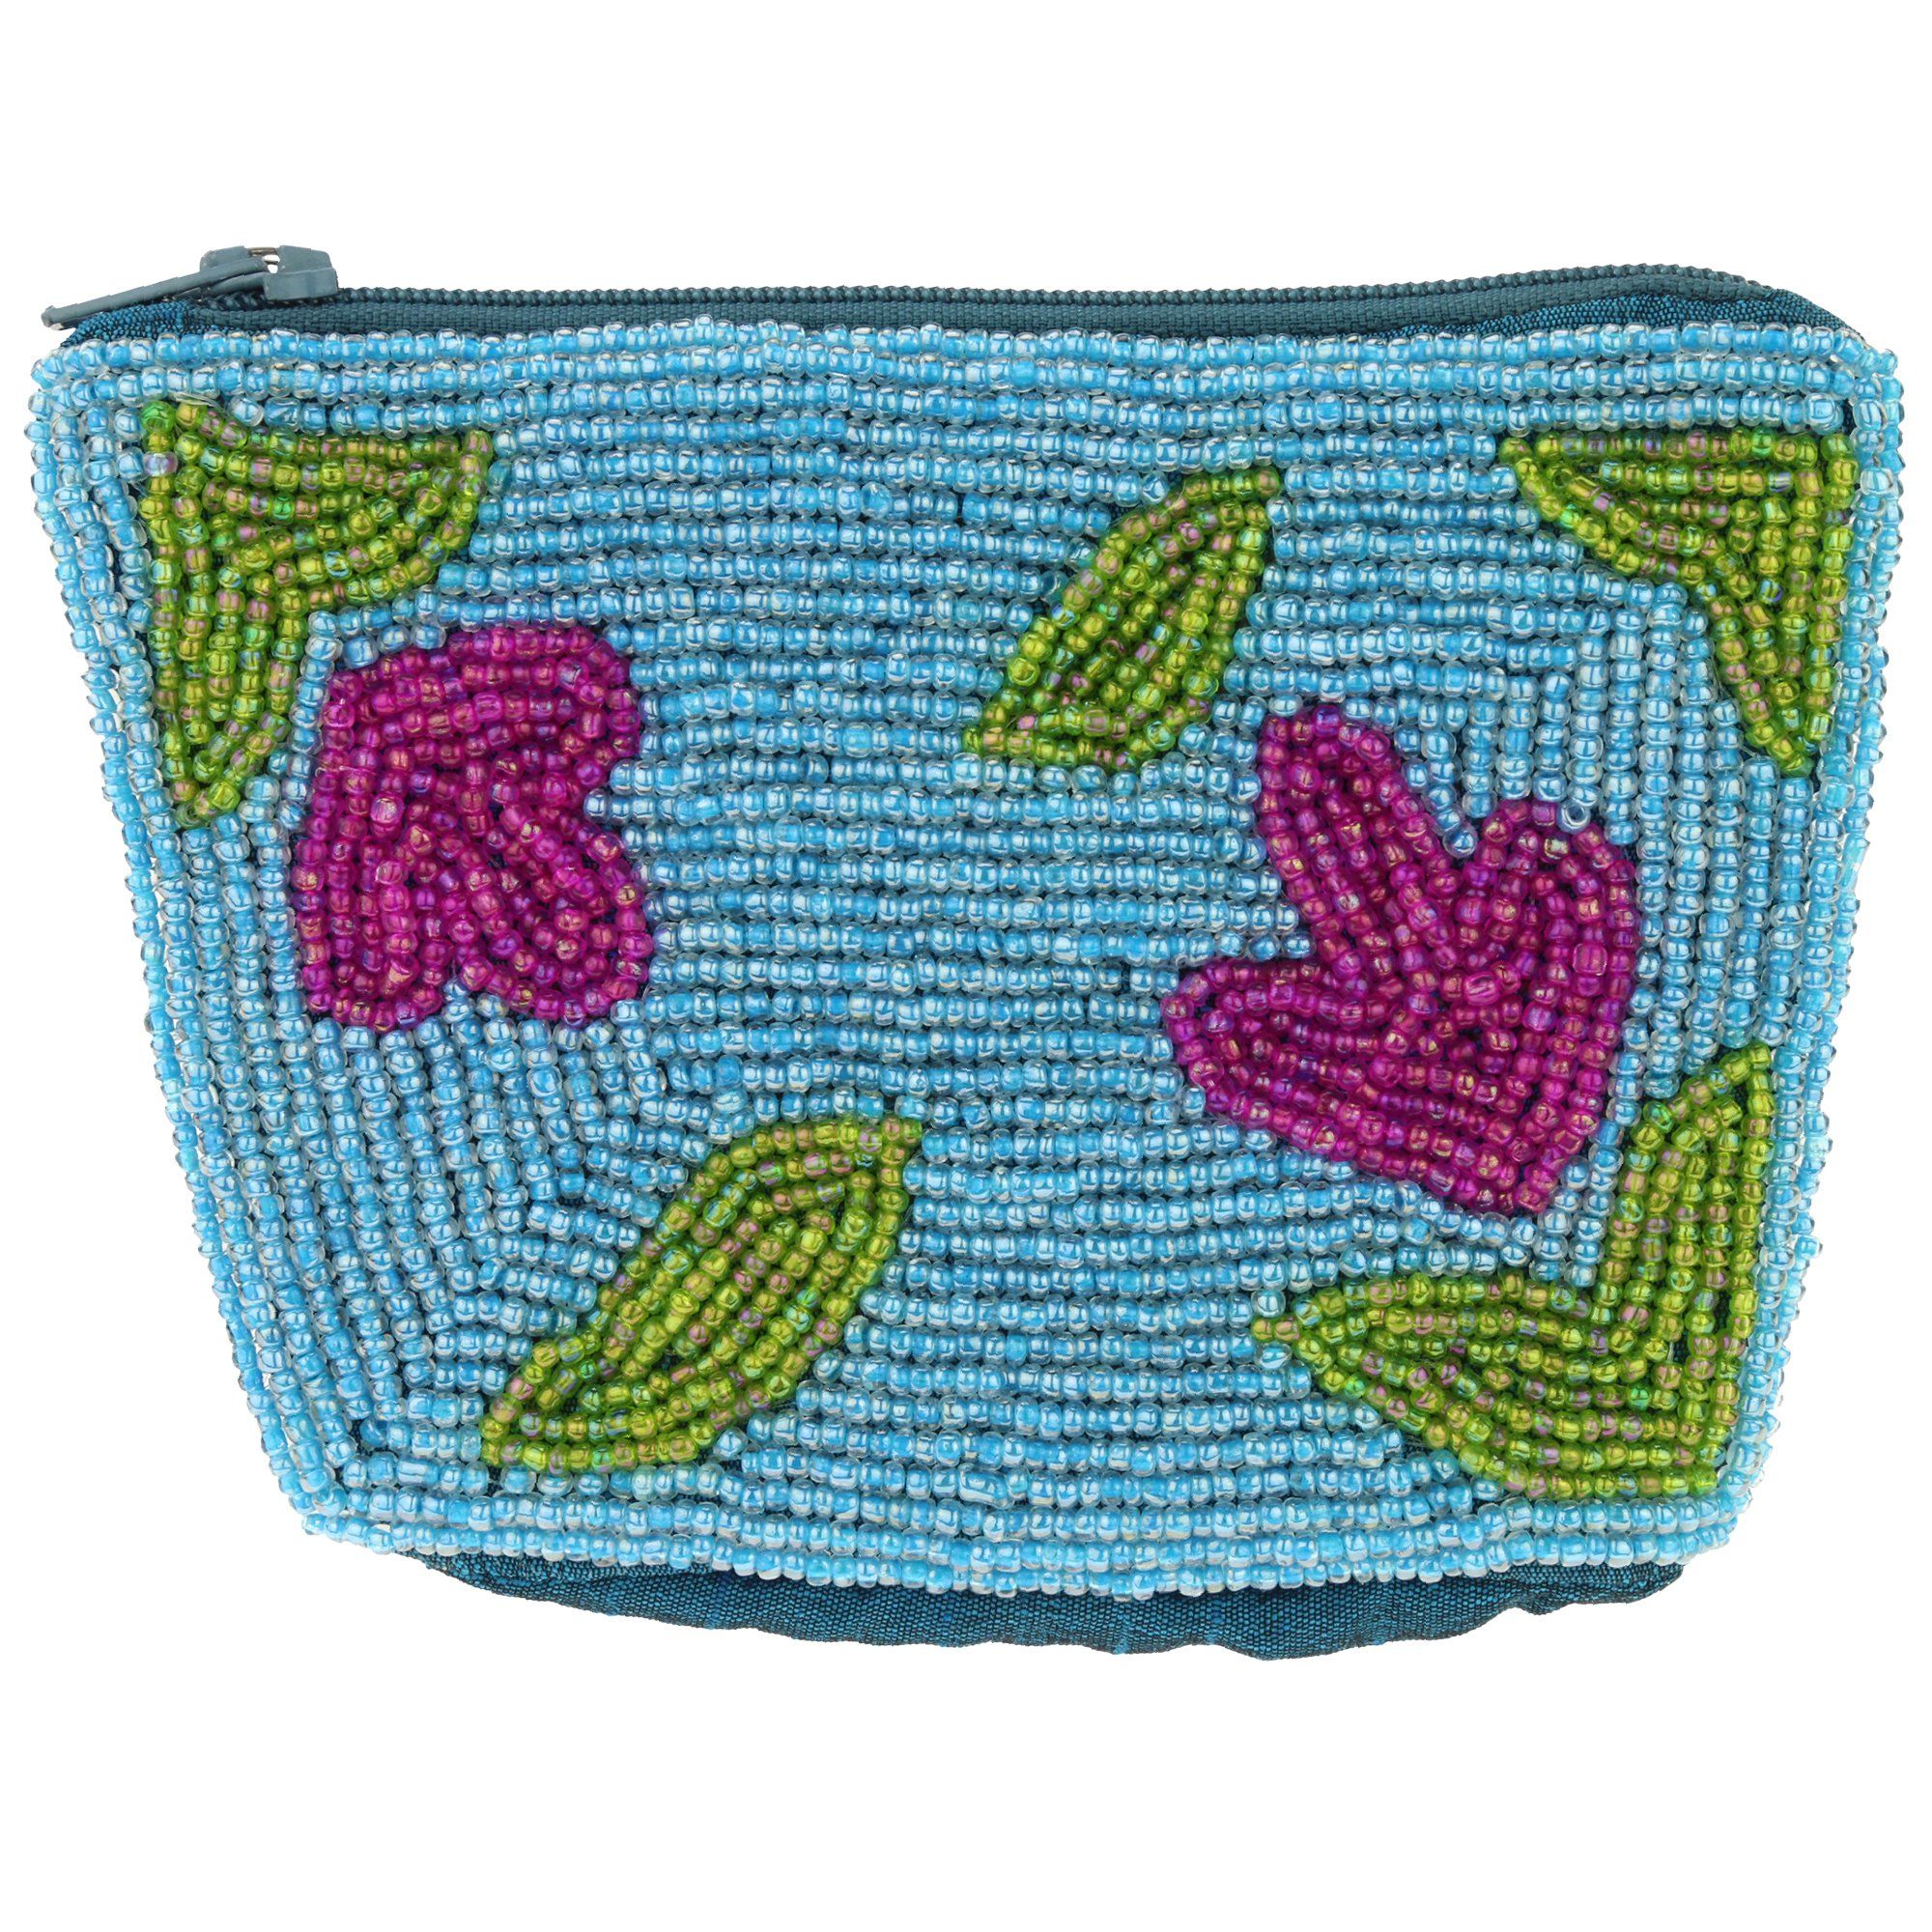 Art Smart Beaded Pouch - Floral